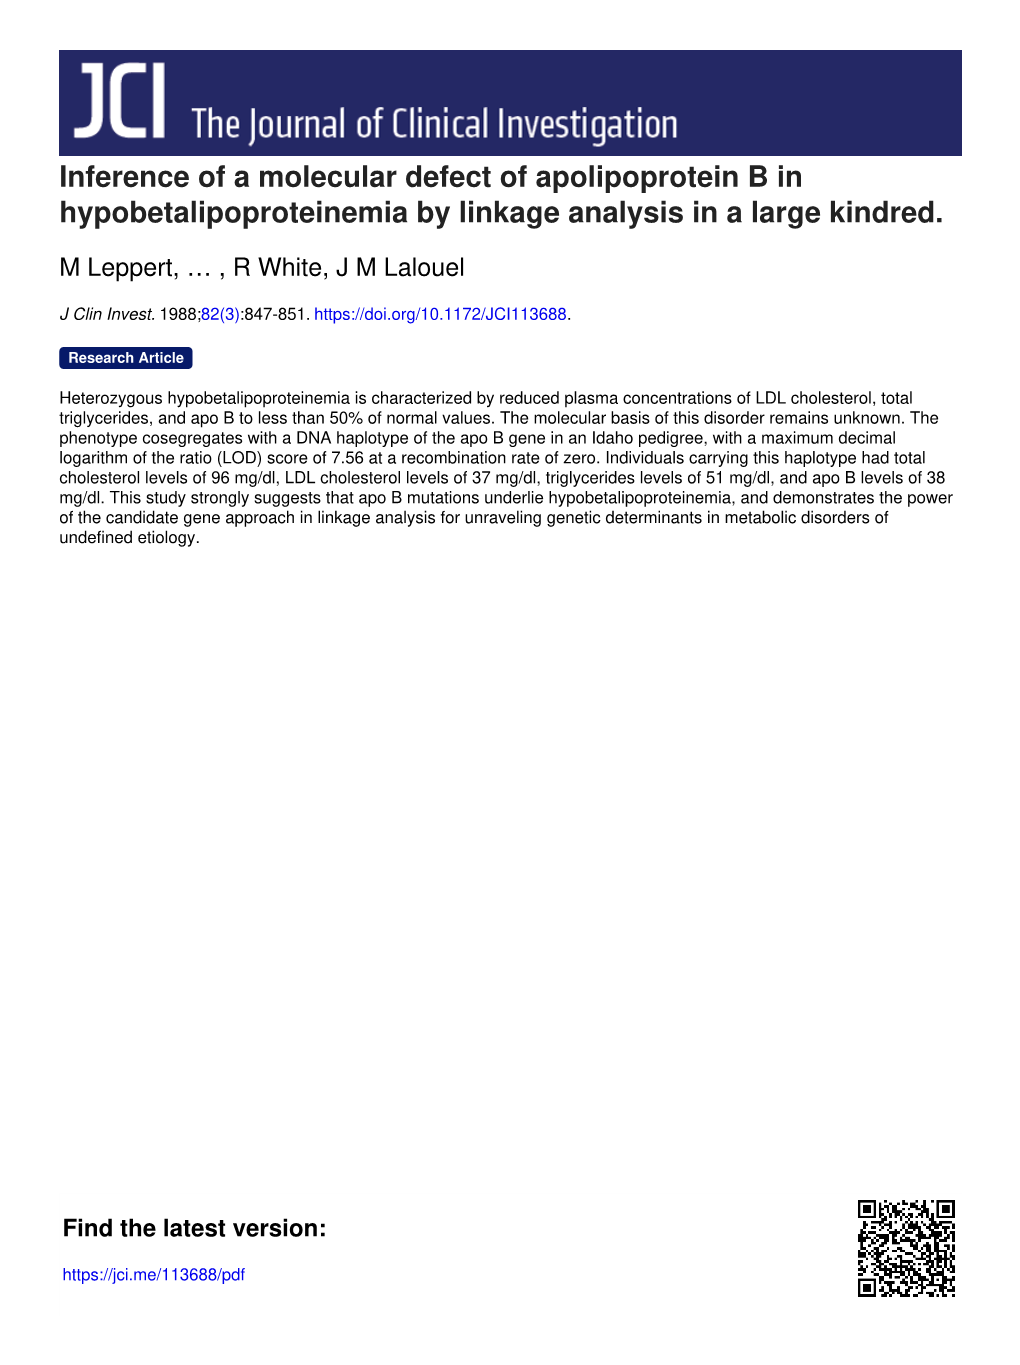 Inference of a Molecular Defect of Apolipoprotein B in Hypobetalipoproteinemia by Linkage Analysis in a Large Kindred